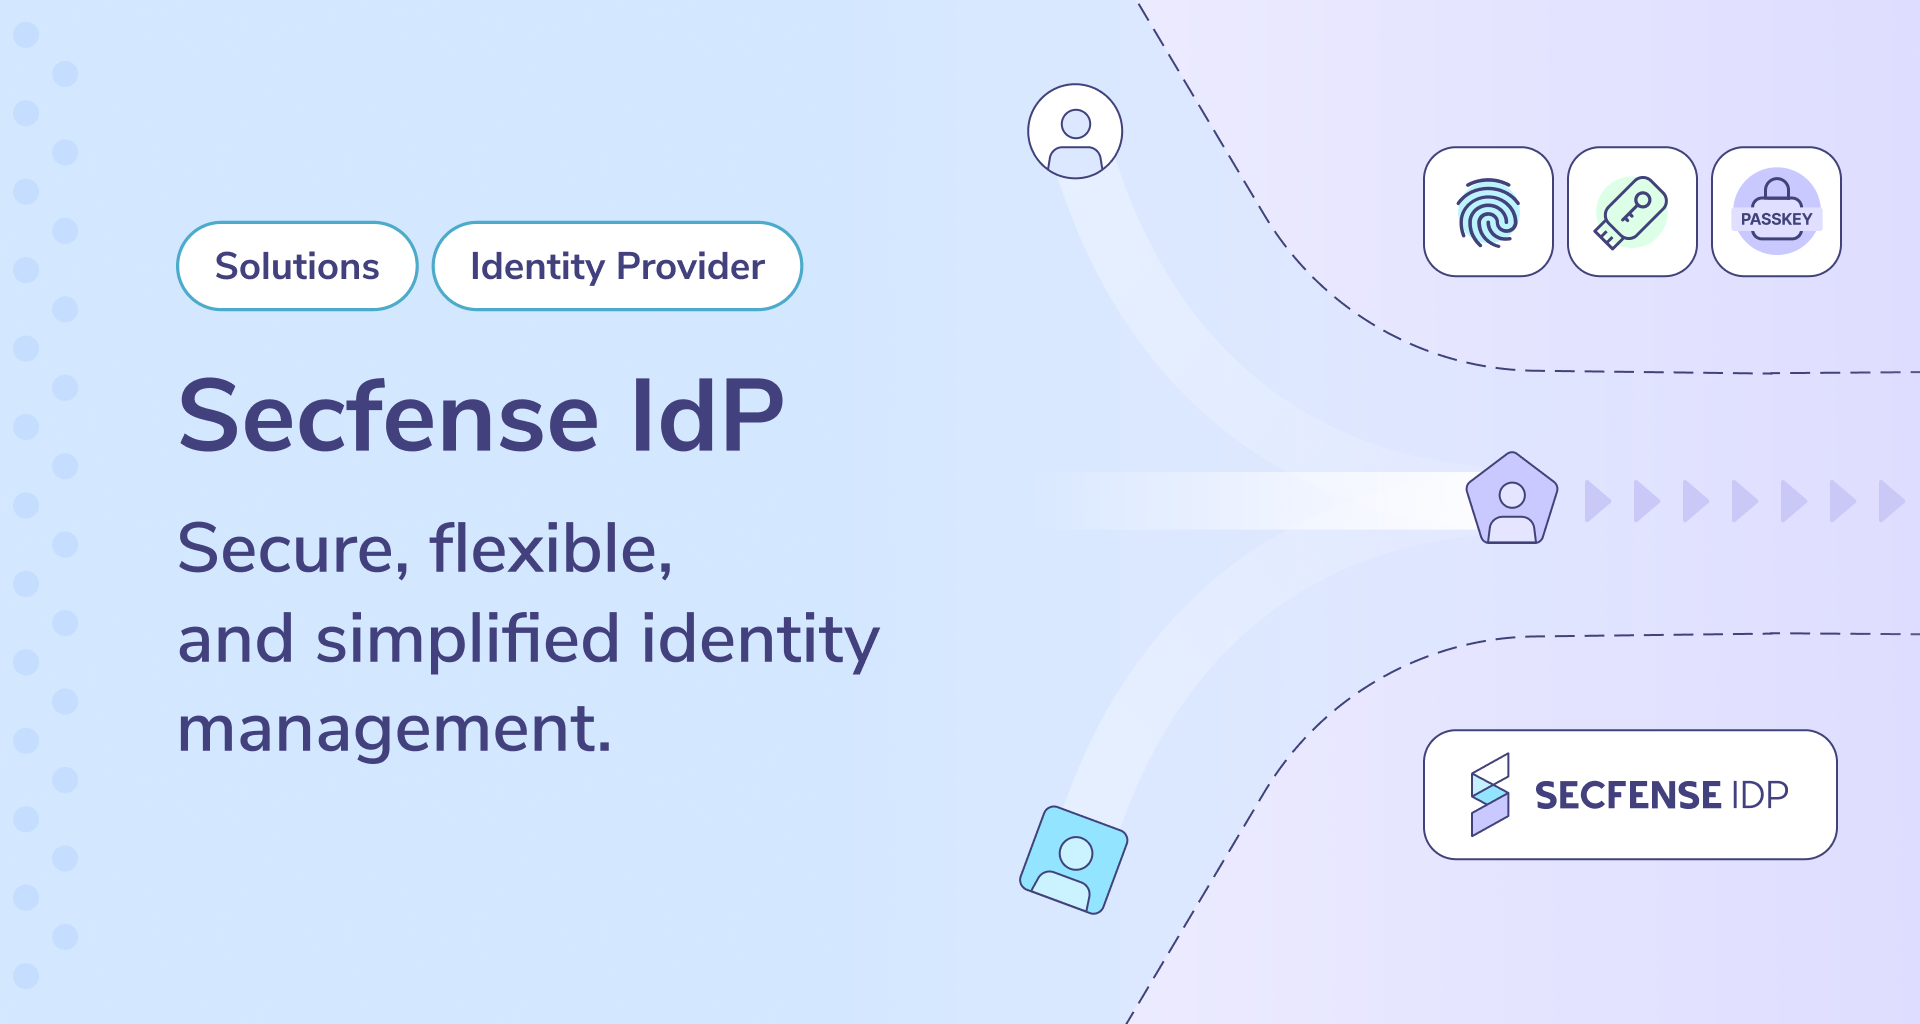 Secfense IdP (Identity Provider) is a new solution in Secfense product offering. Secfense IdP was created to help with juggling many identities and smoothly shifting between different IAM systems. With Secfense IdP, businesses can pick and choose features from various IAM providers without having to do a full switch.